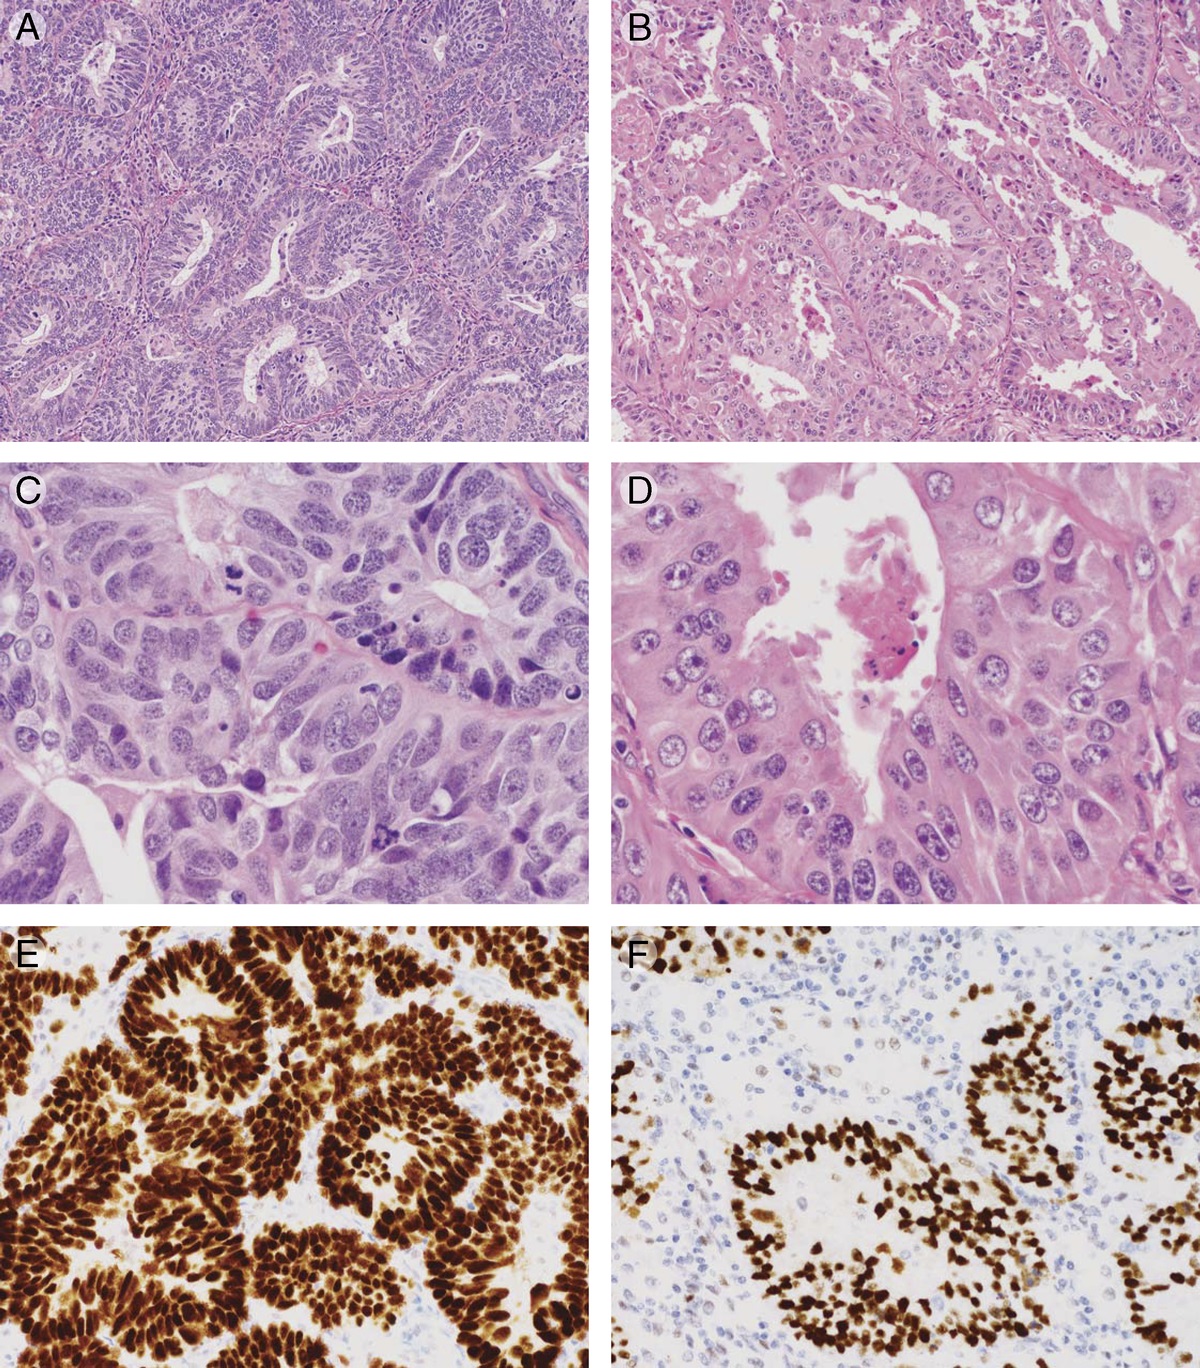 Counterpoint: Integration of Molecular Subtype and Histotype/Grade Into One Classification System for Endometrial Carcinoma